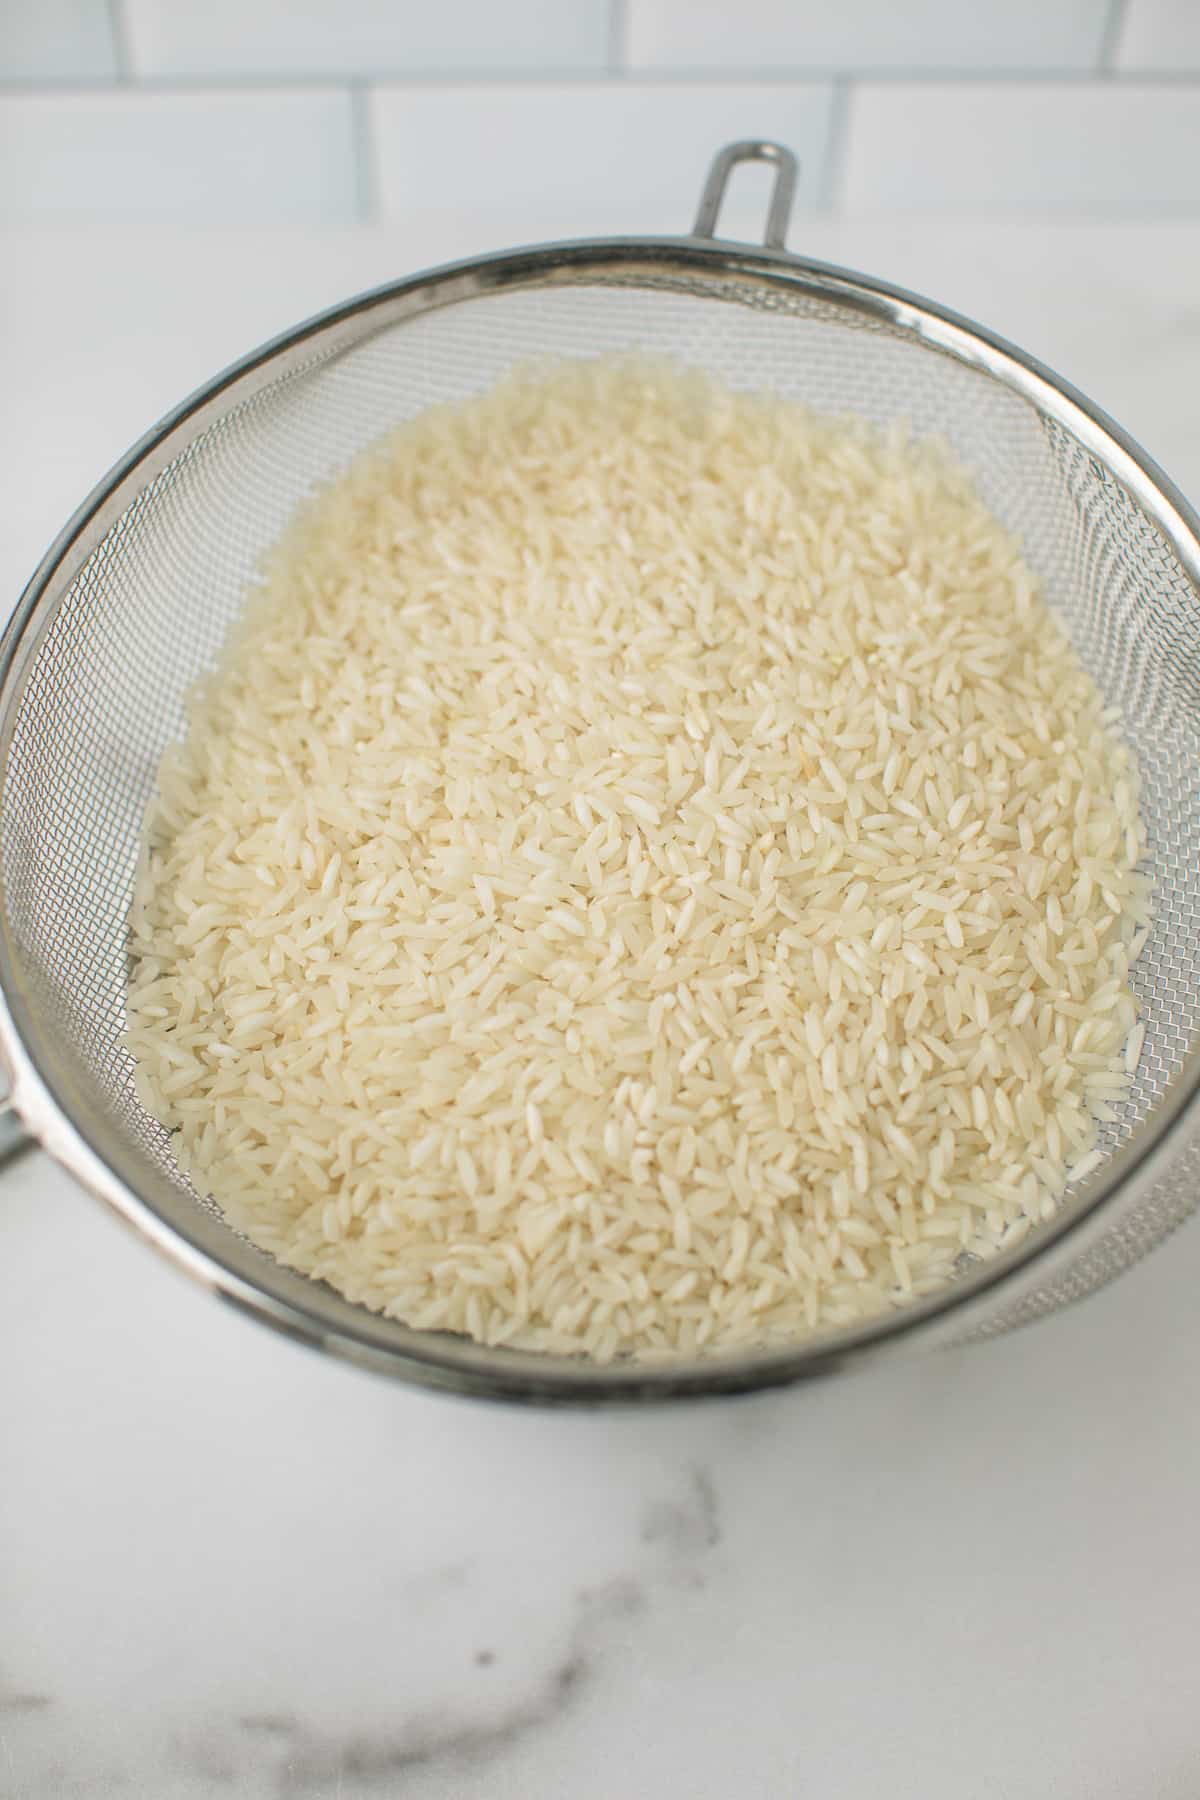 white rice in a fine mesh colander for rinsing